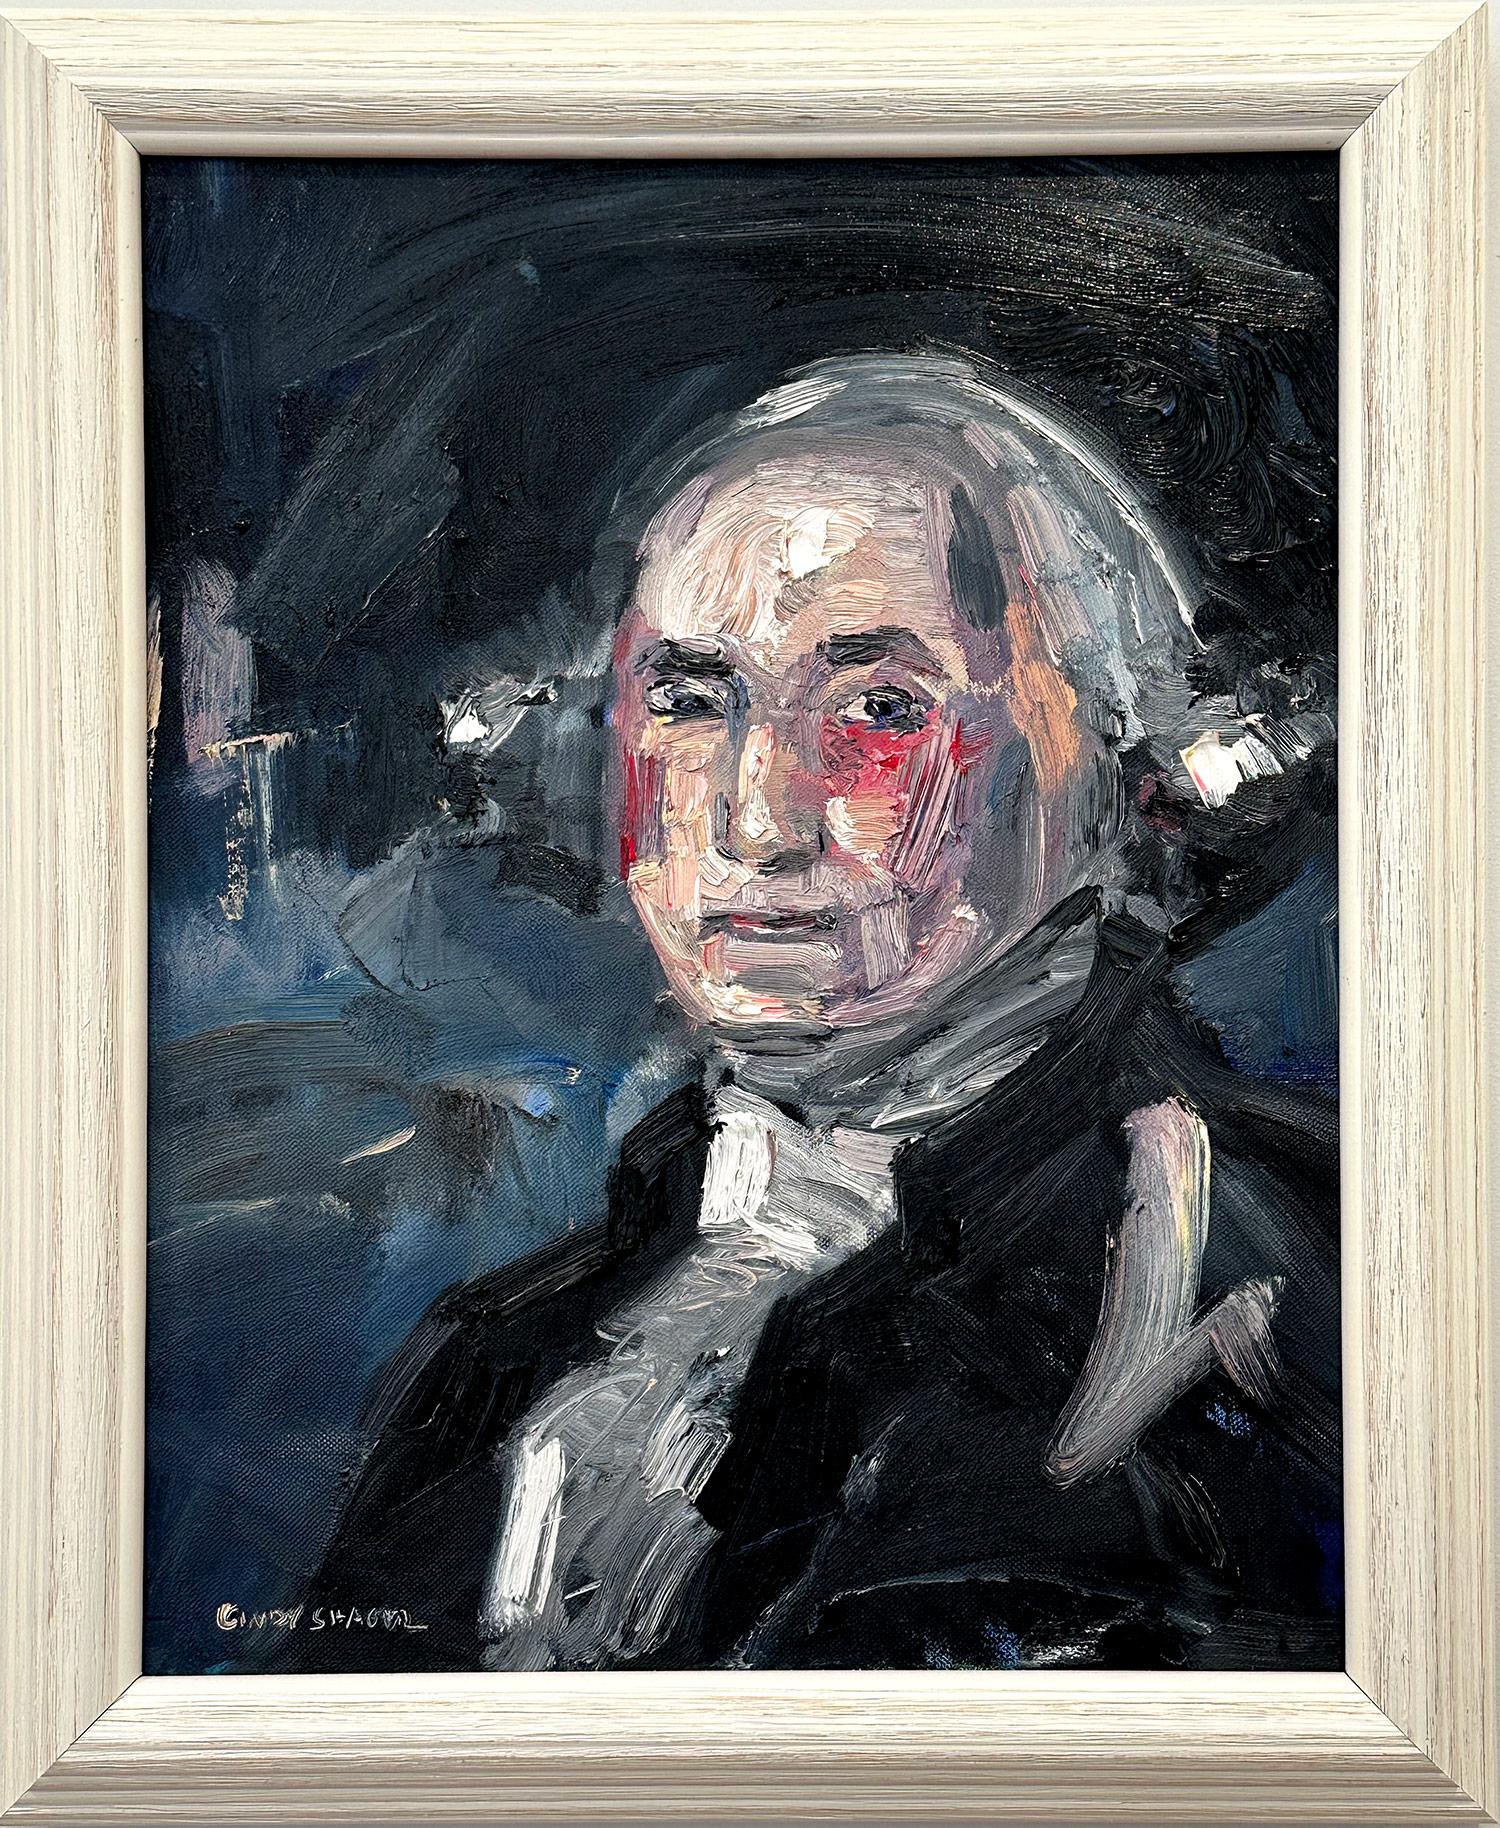 Cindy Shaoul Figurative Painting - "Founding Father" George Washington Impressionistic Abstract Oil Painting